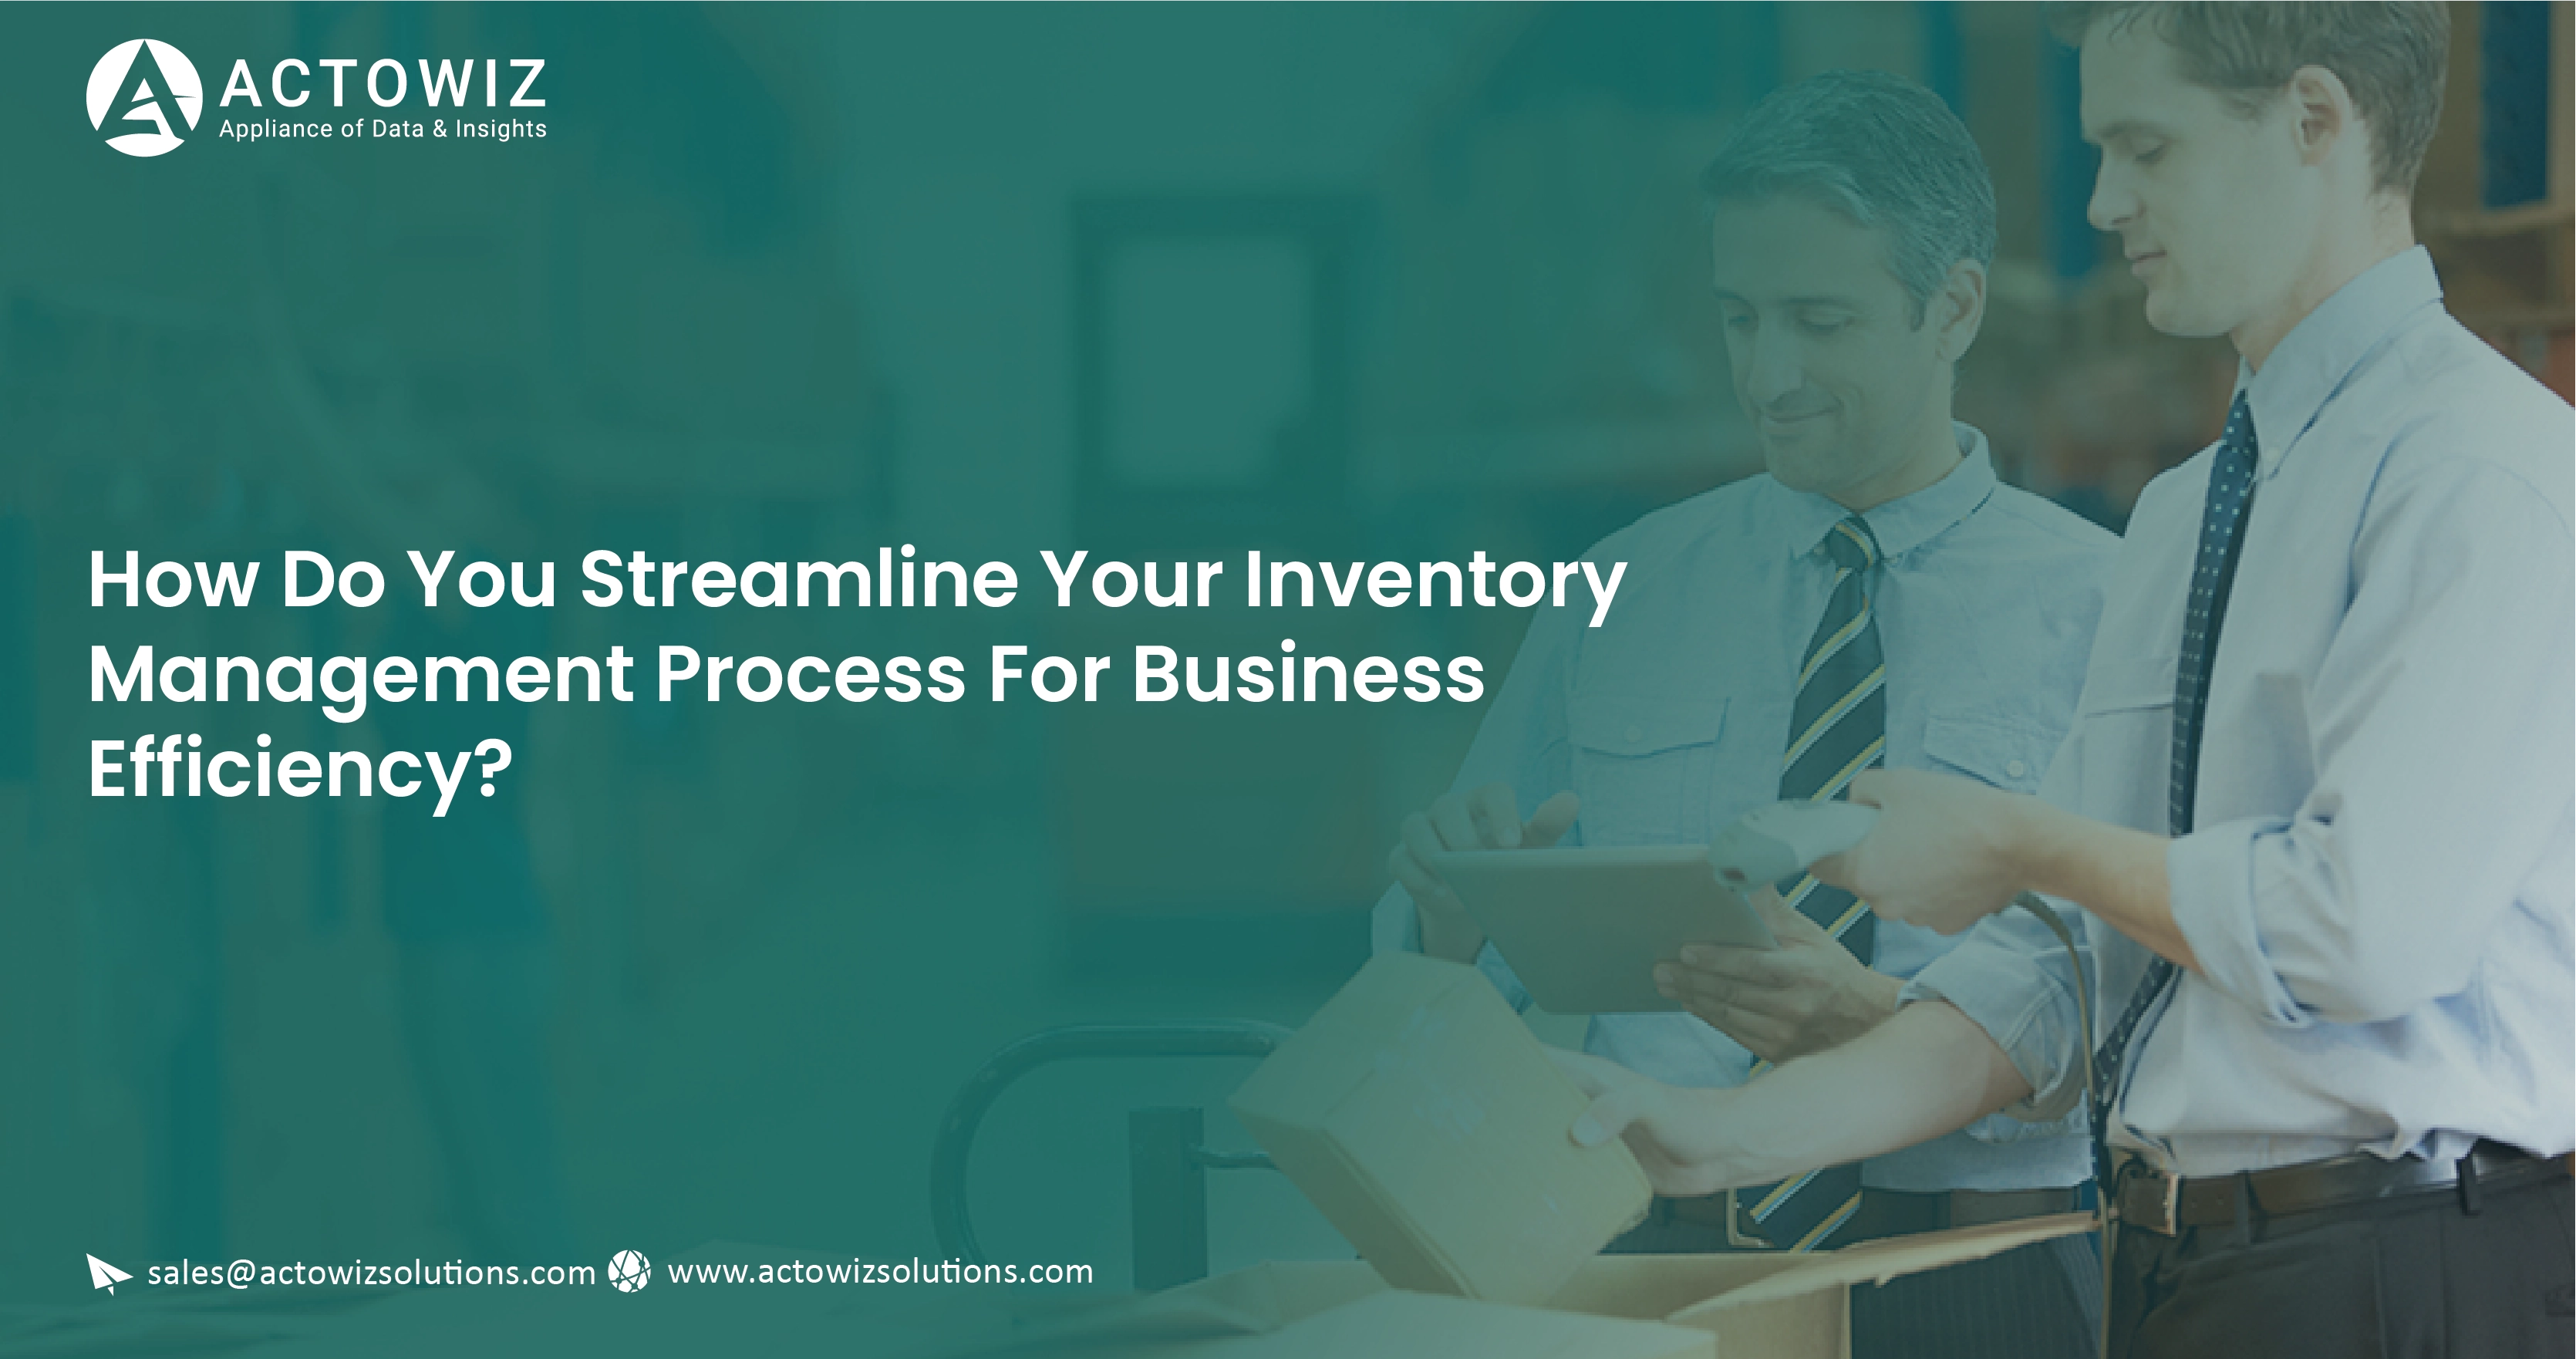 How-Do-You-Streamline-Your-Inventory-Management-Process-For-Business-Efficiency-01